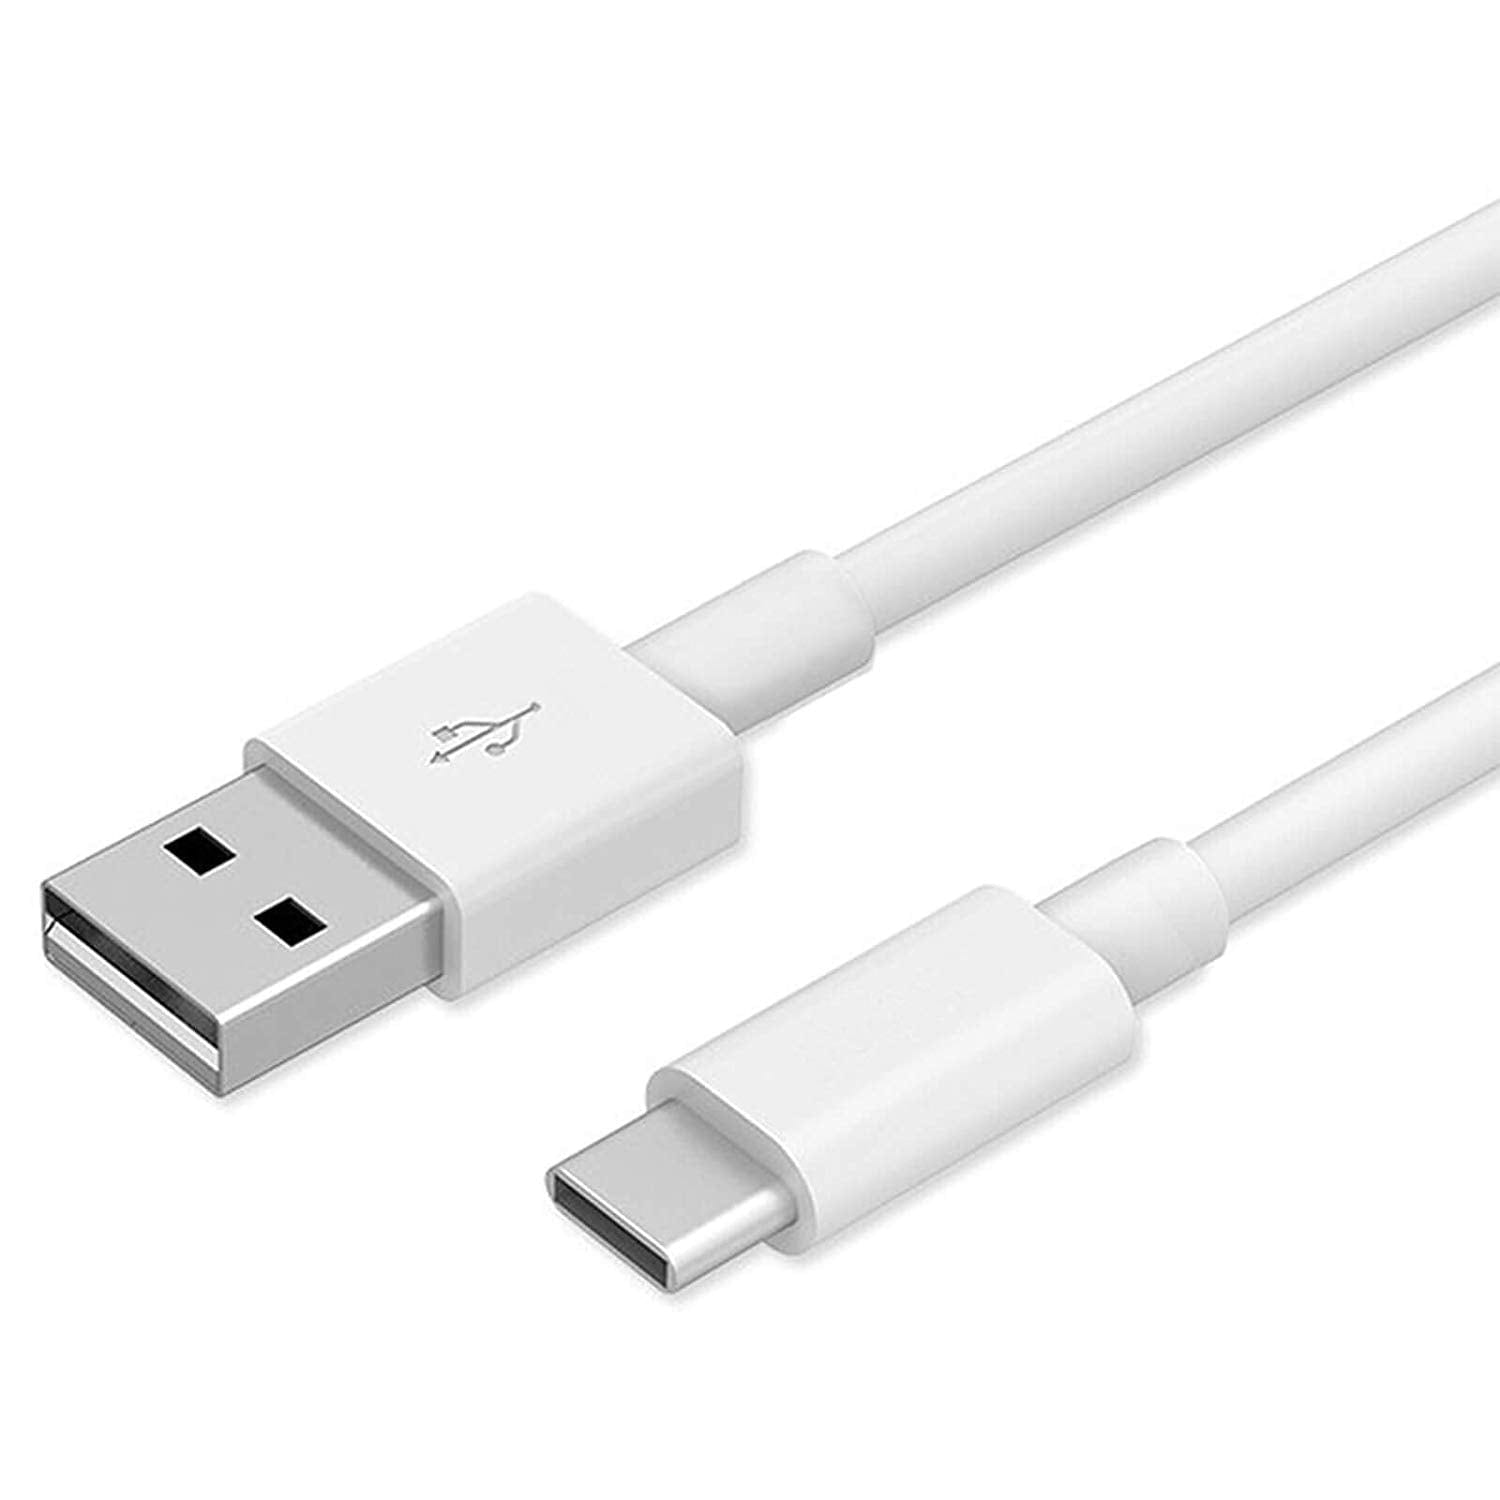 Samsung Galaxy A21s USB to Type C Phone Charger Charging Cable In Car White - 50 CM Short - SmartPhoneGadgetUK